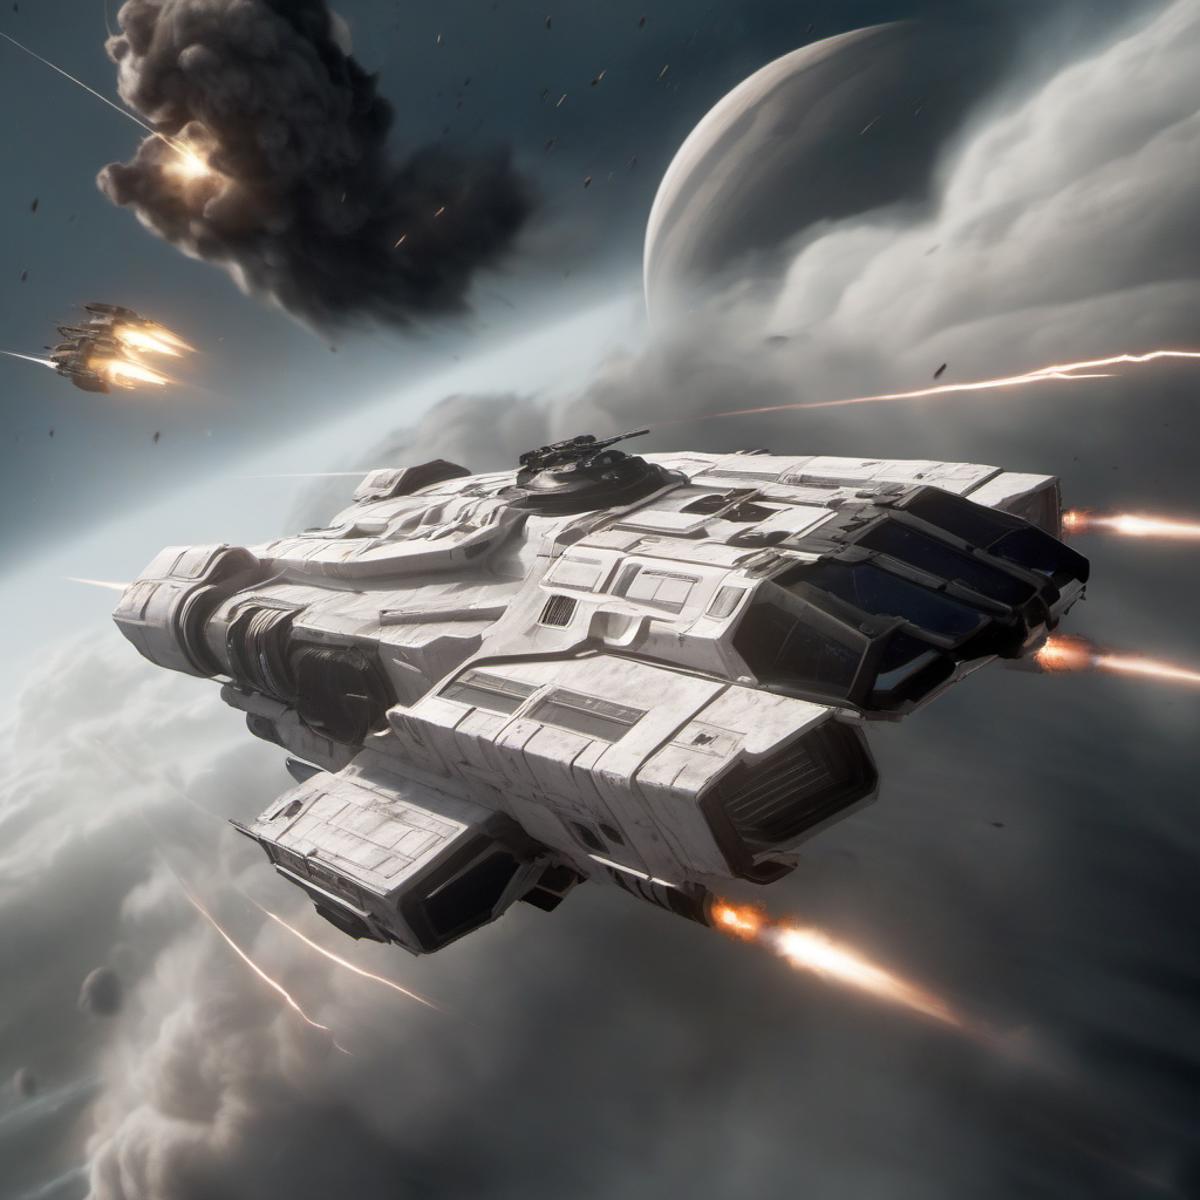 StarCitizen XL image by braintacles